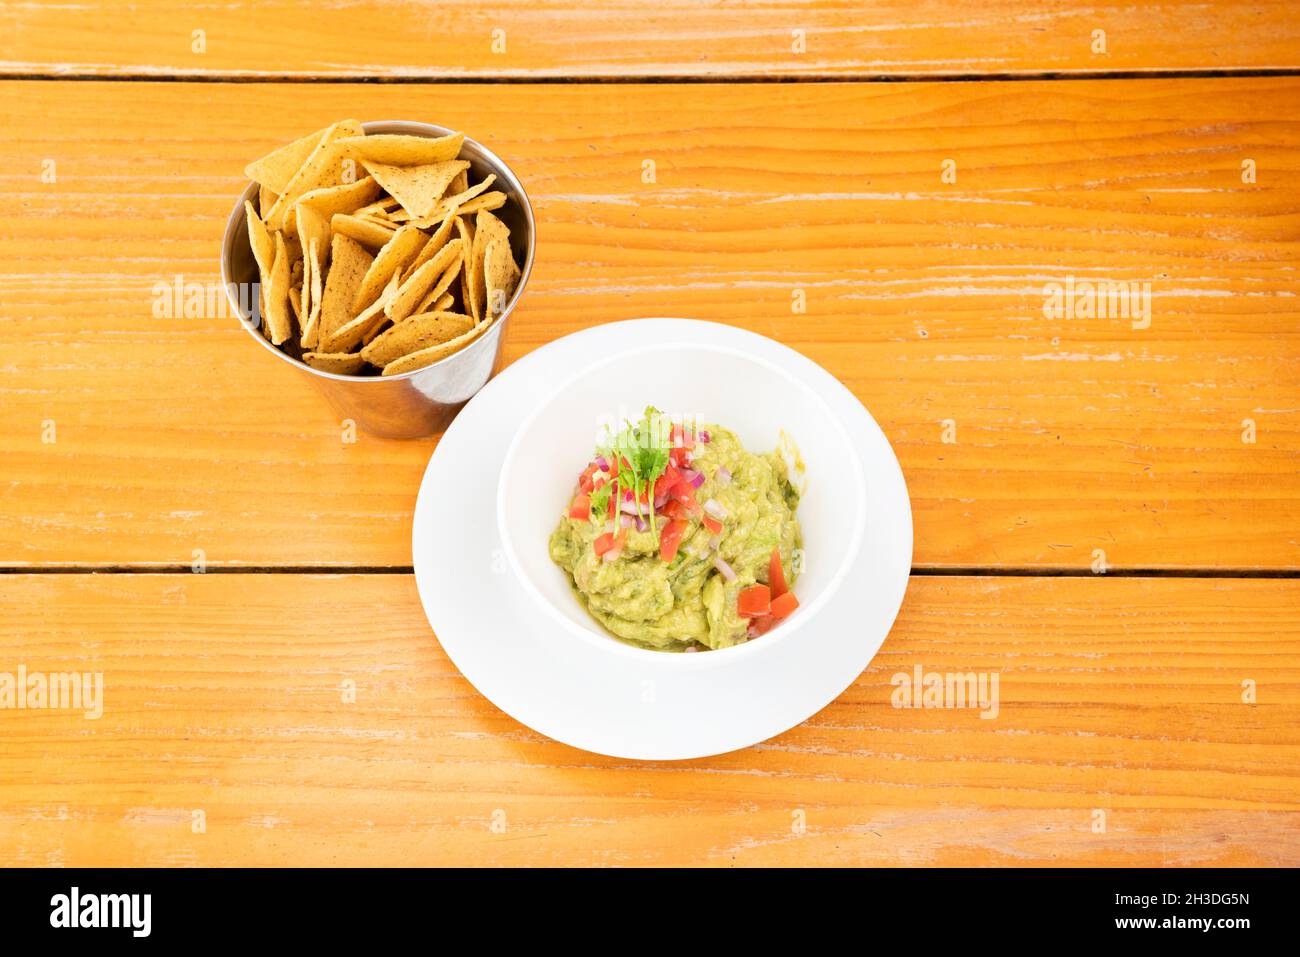 Plate of fresh Mexican guacamole with corn chips, parsley and tomato Stock Photo